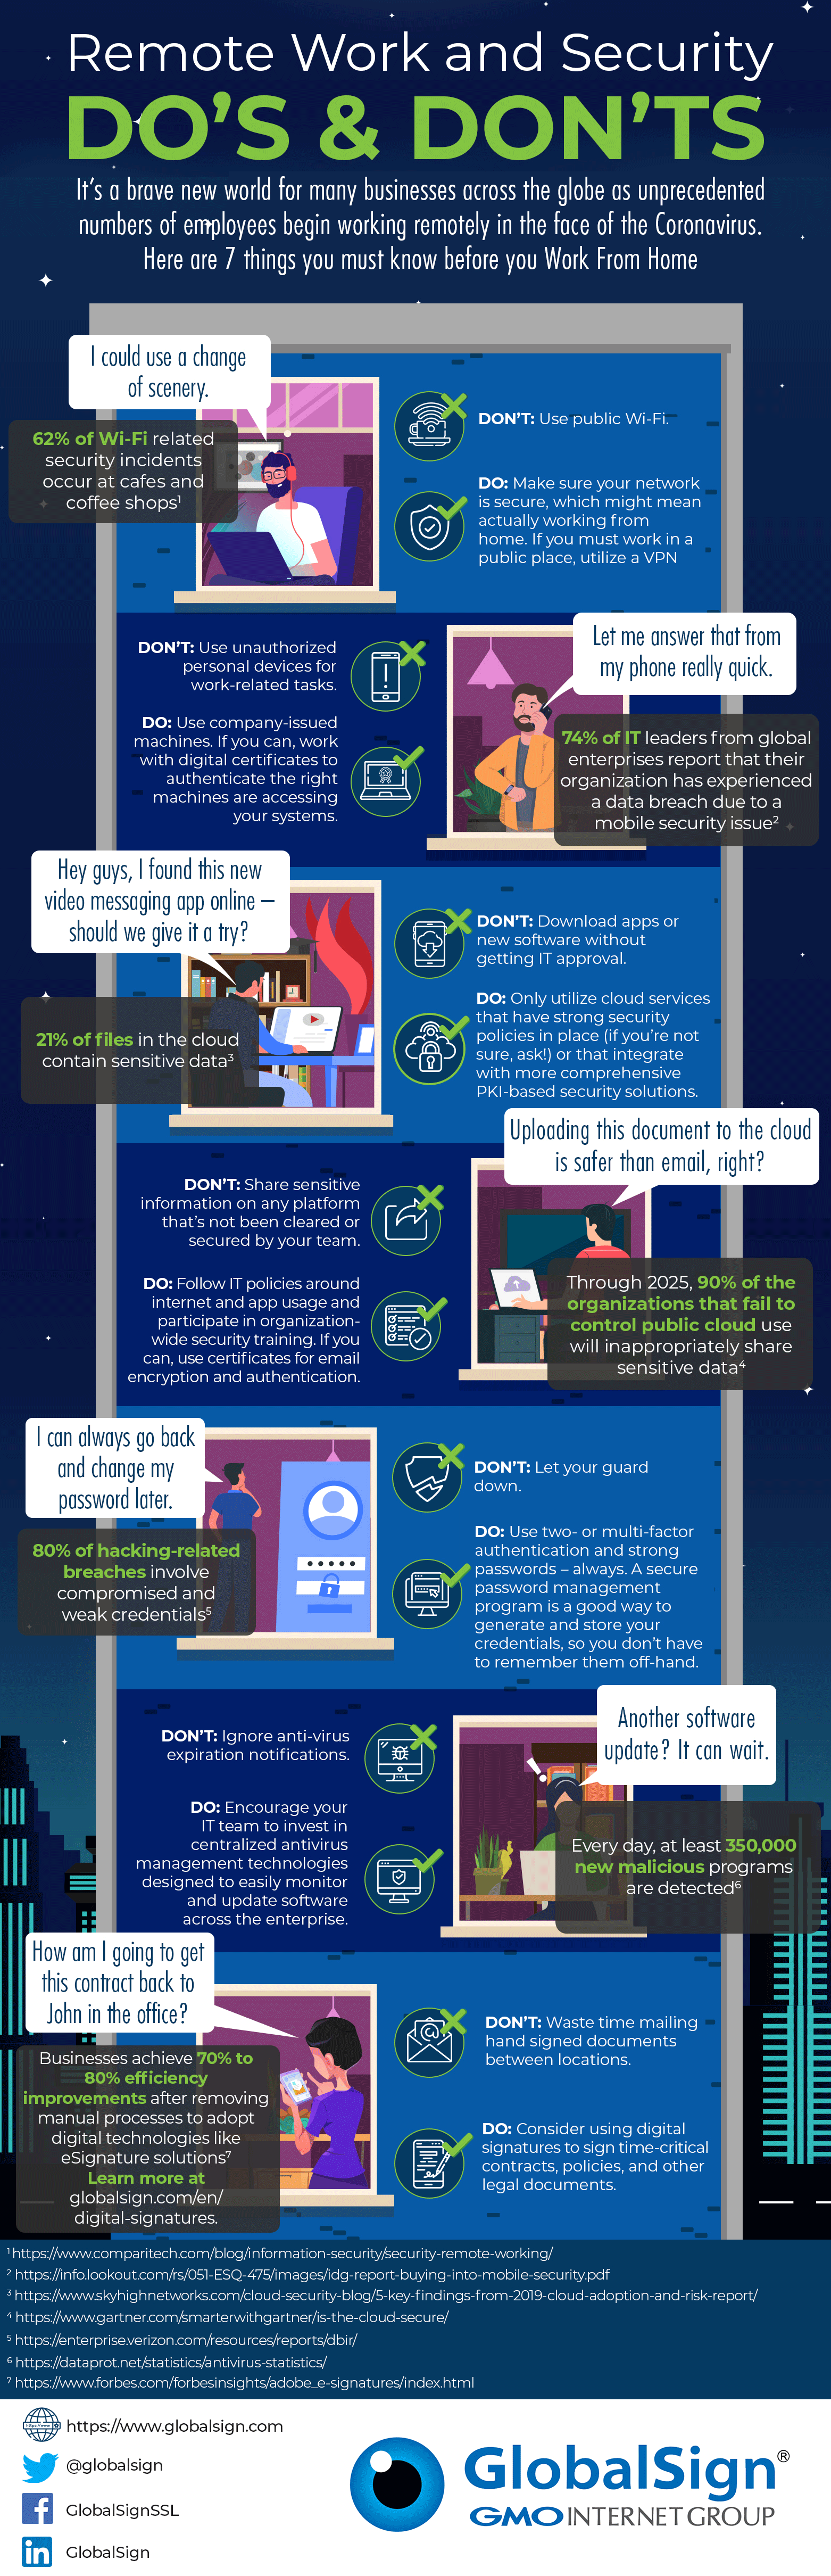 GlobalSign Remote Work Infographic for Web